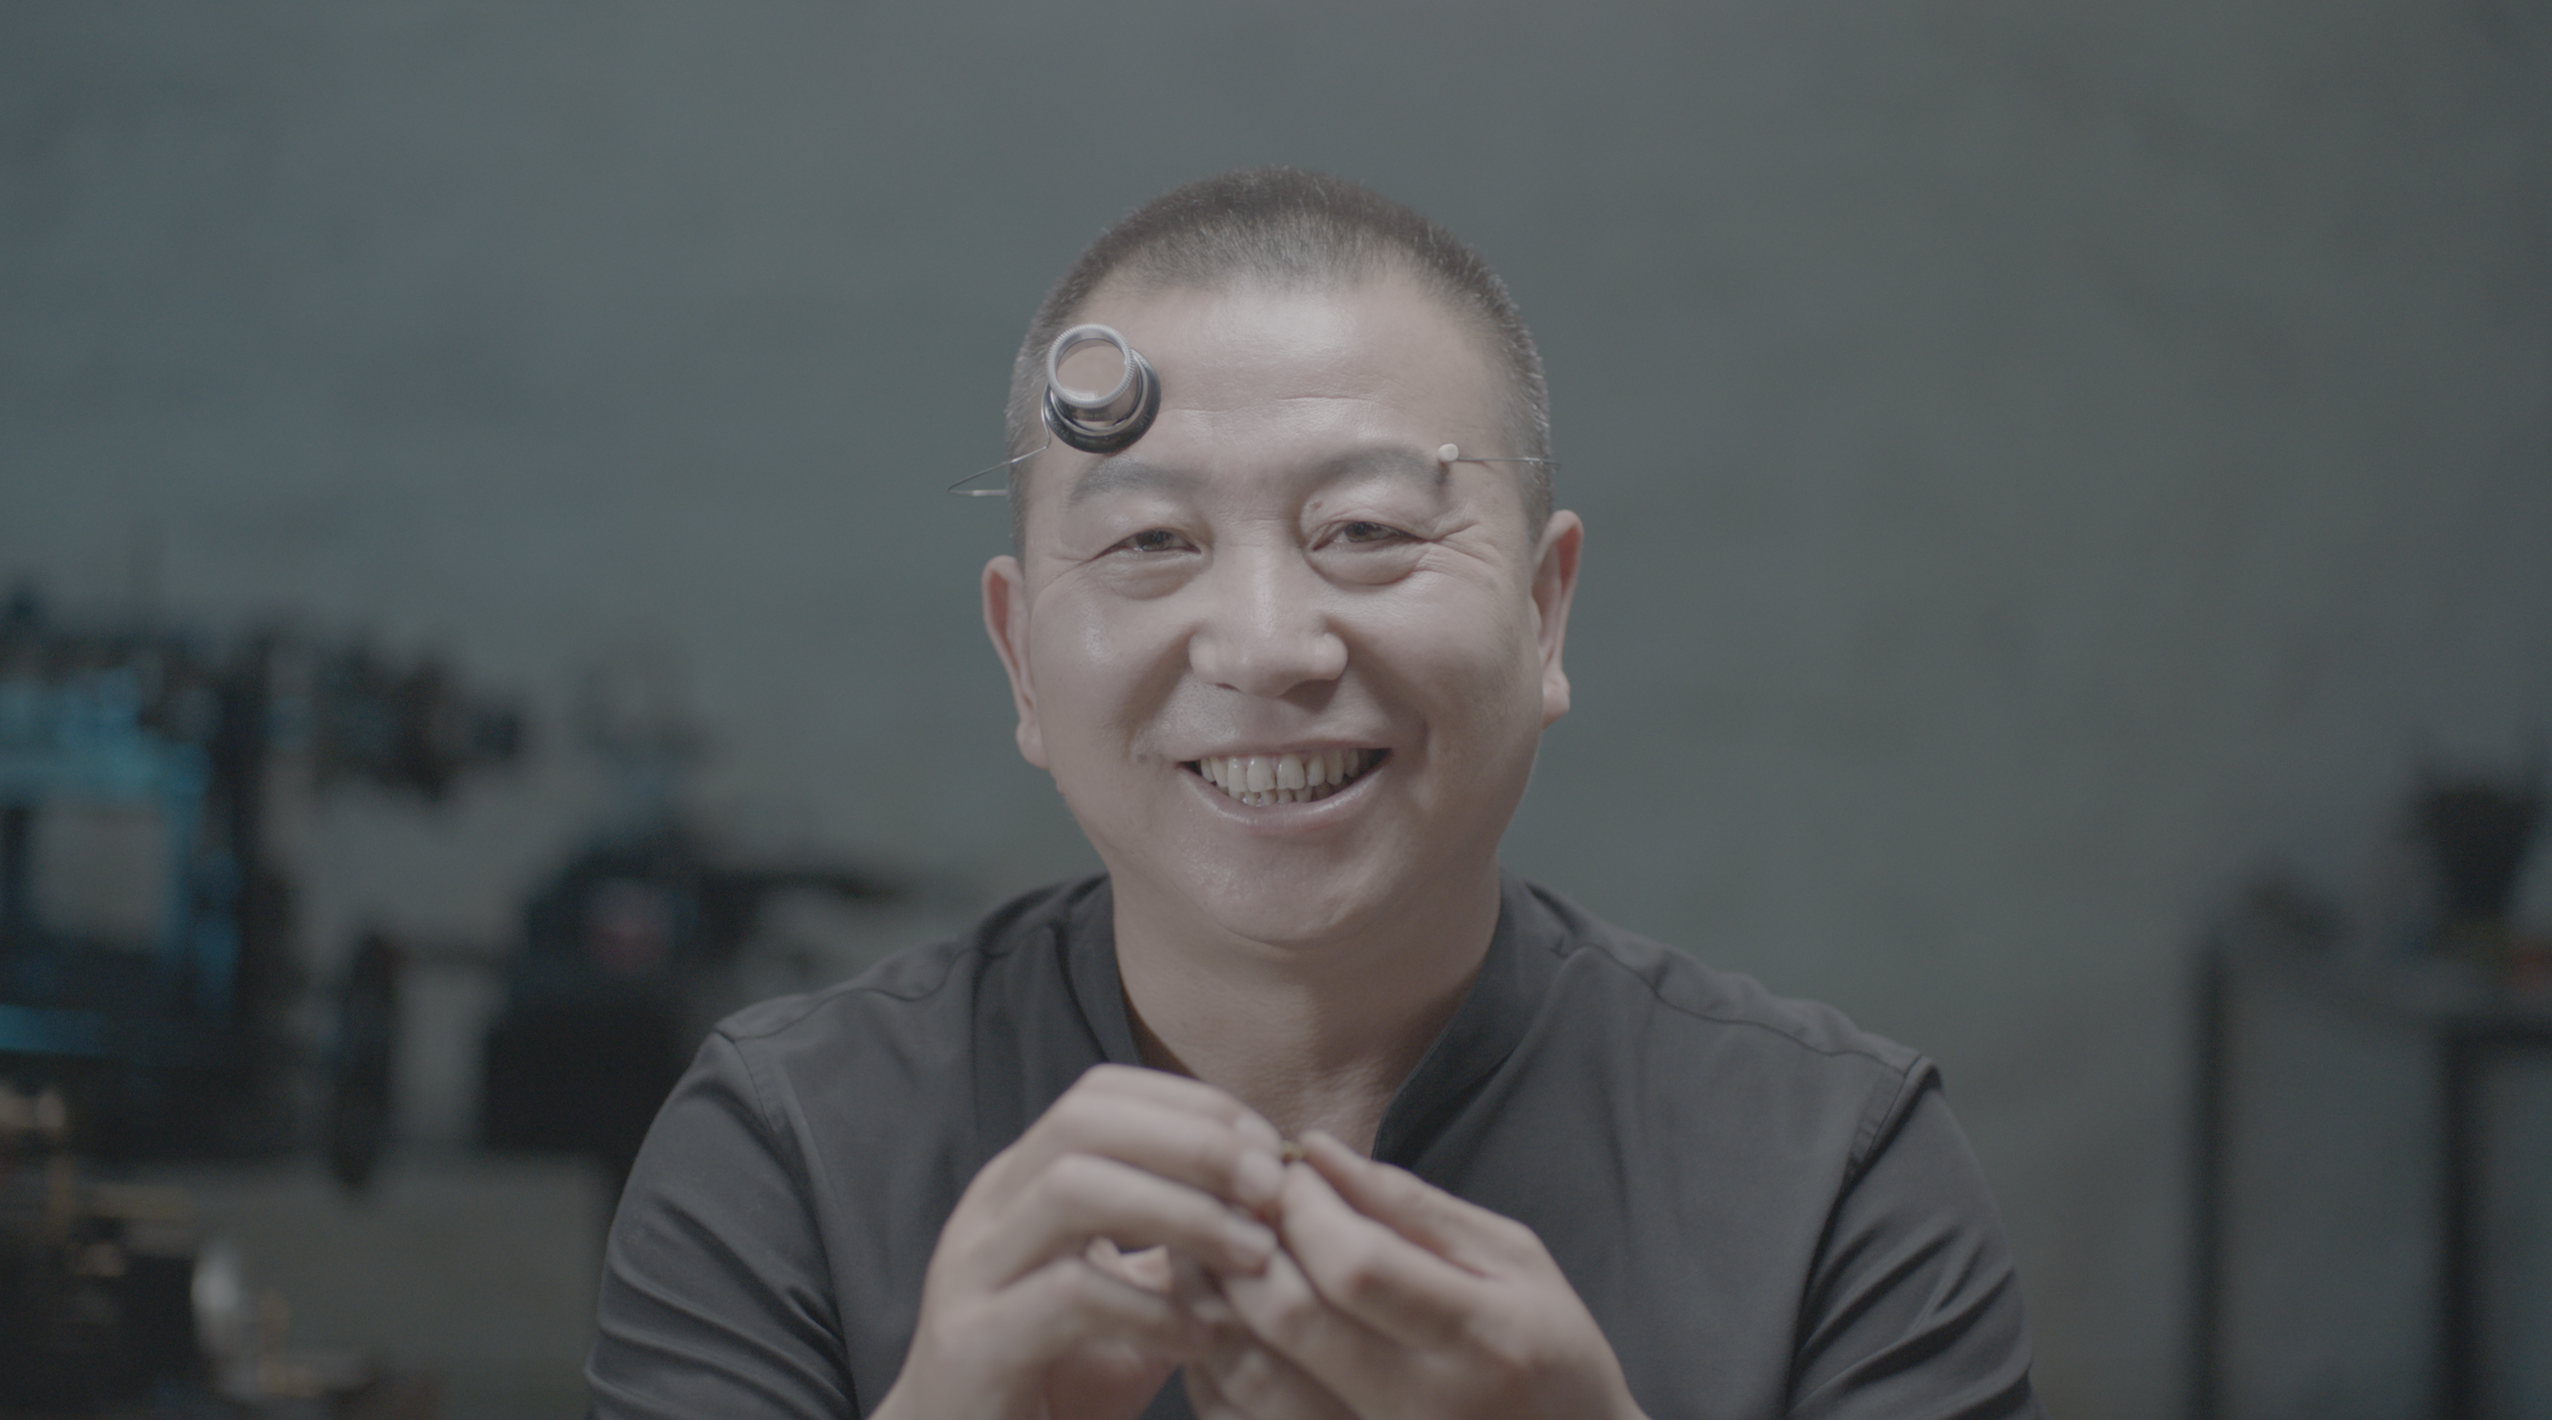 Atelier Wen Perception: Update #5 - The Incredible Story of Master Cheng, The Sole Guilloché Master Craftsman Of China